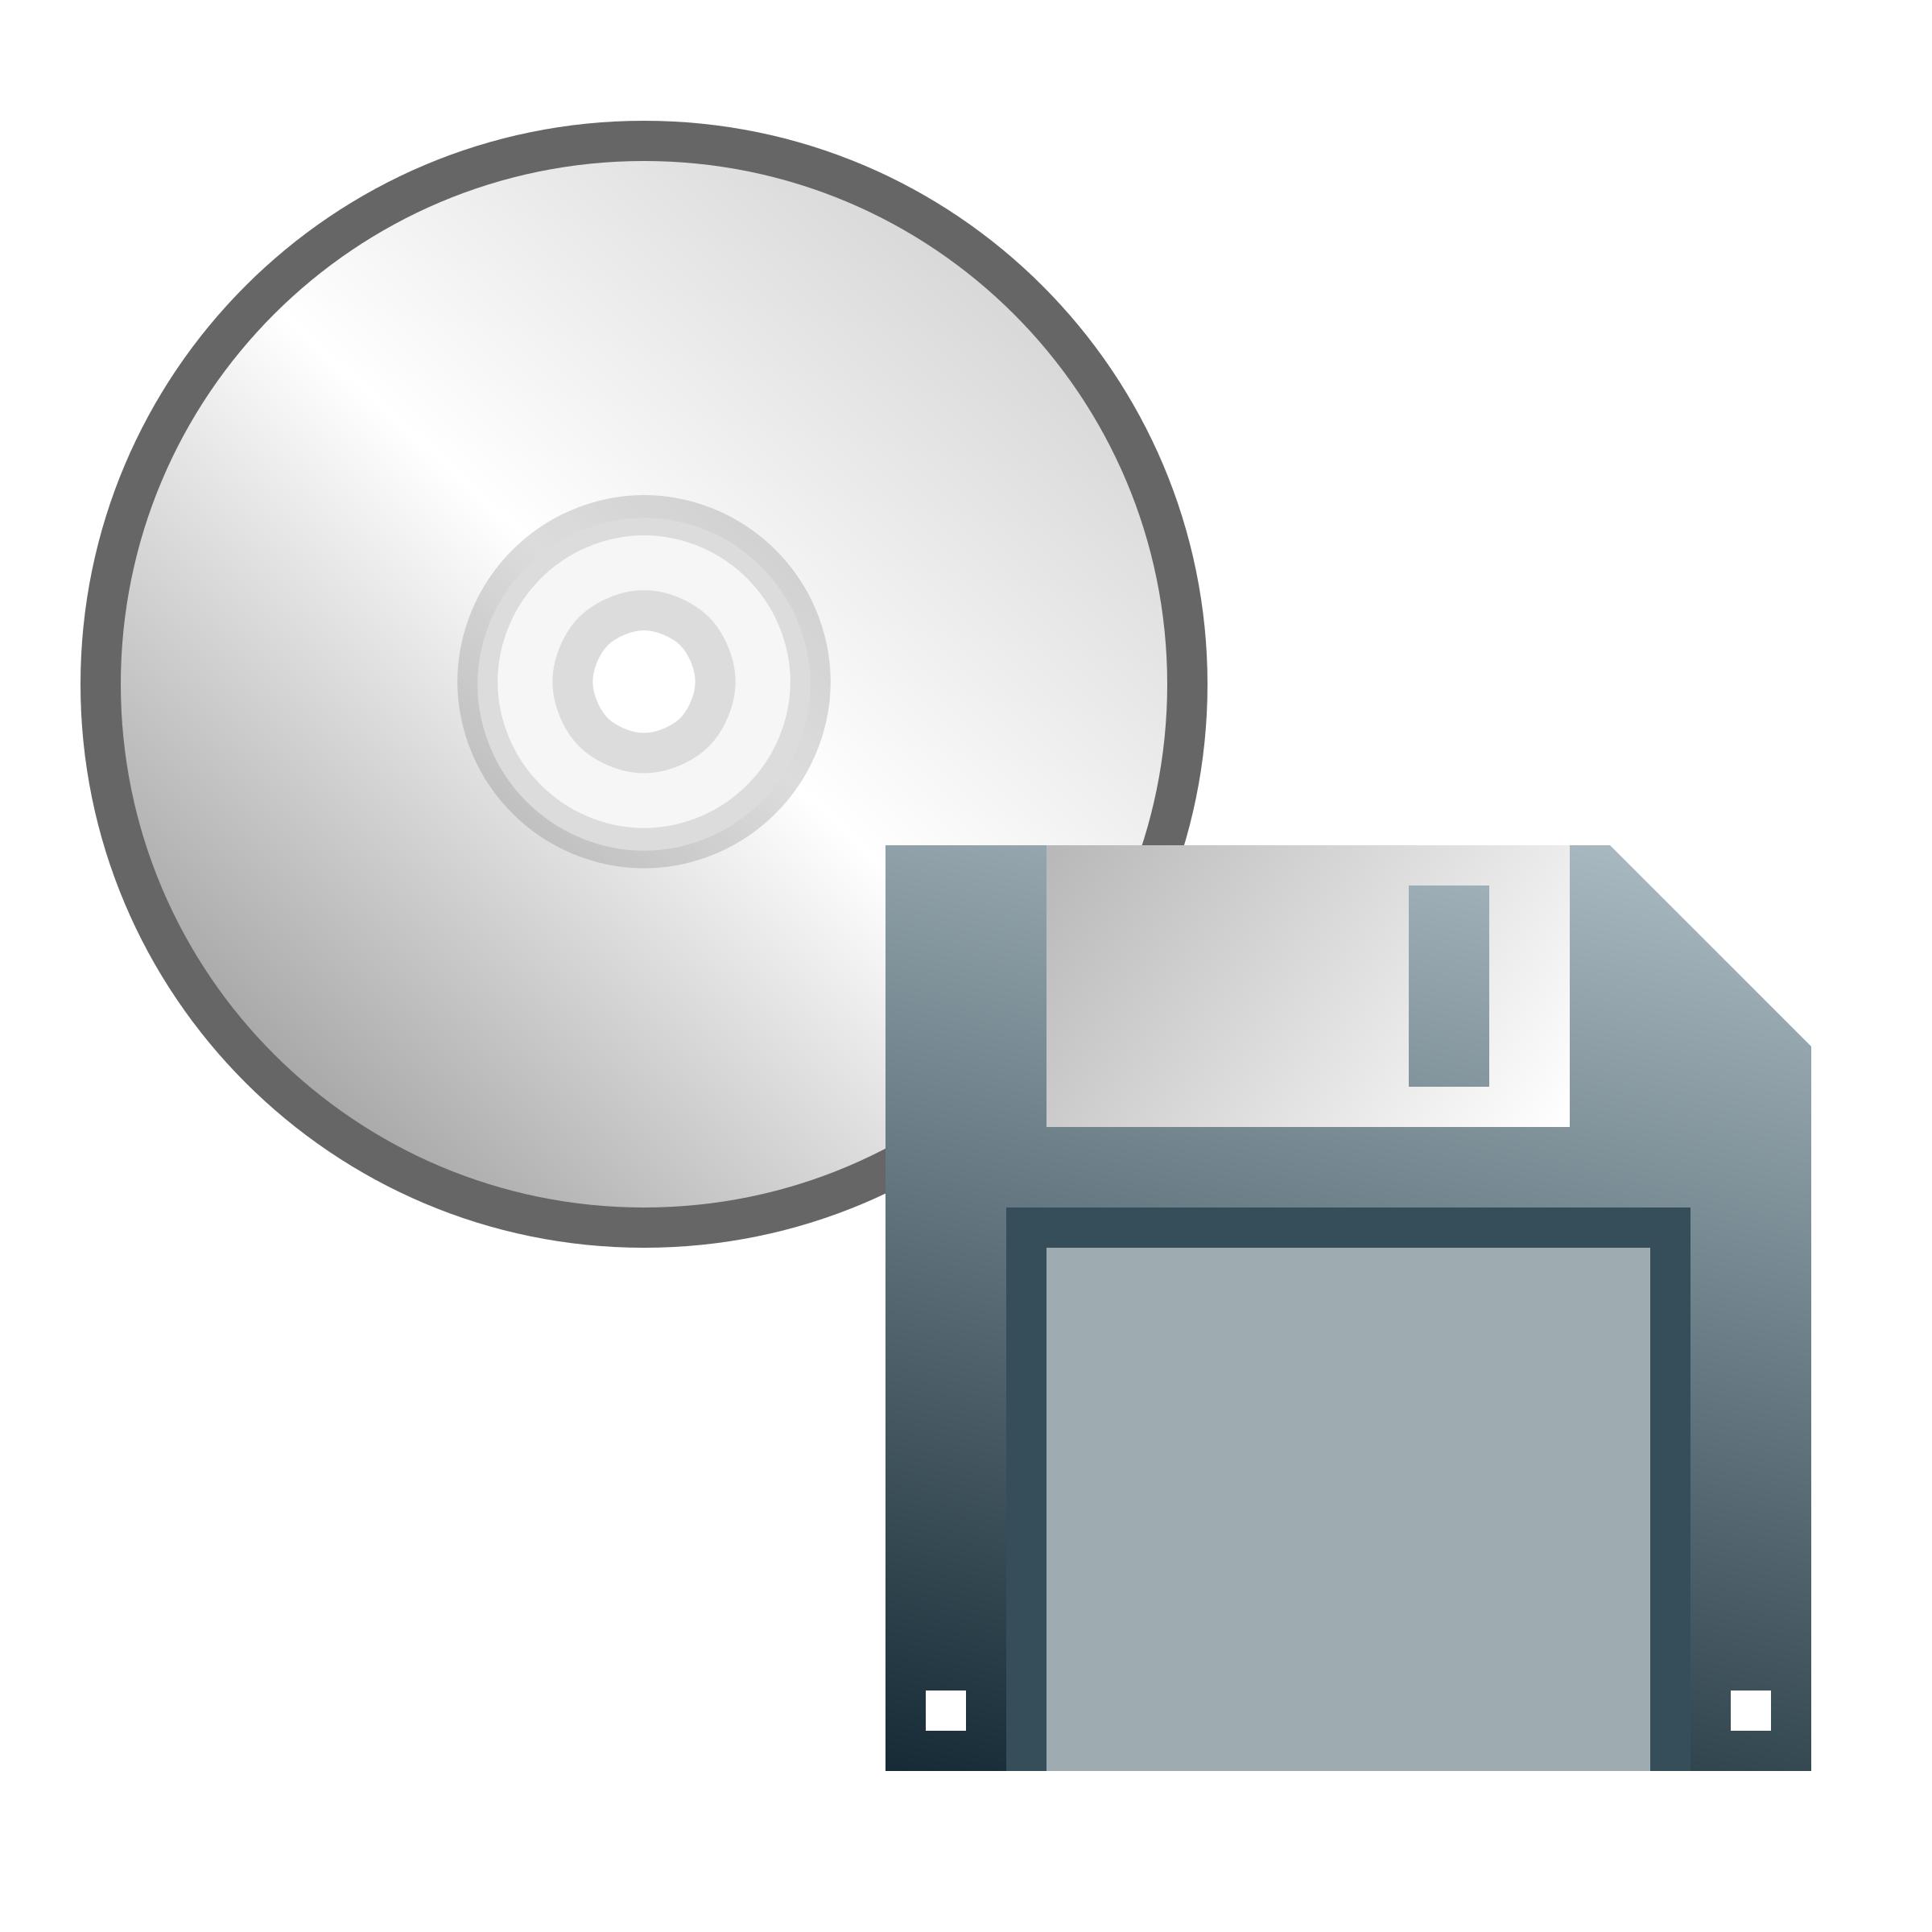 CD or floppy disk icon png